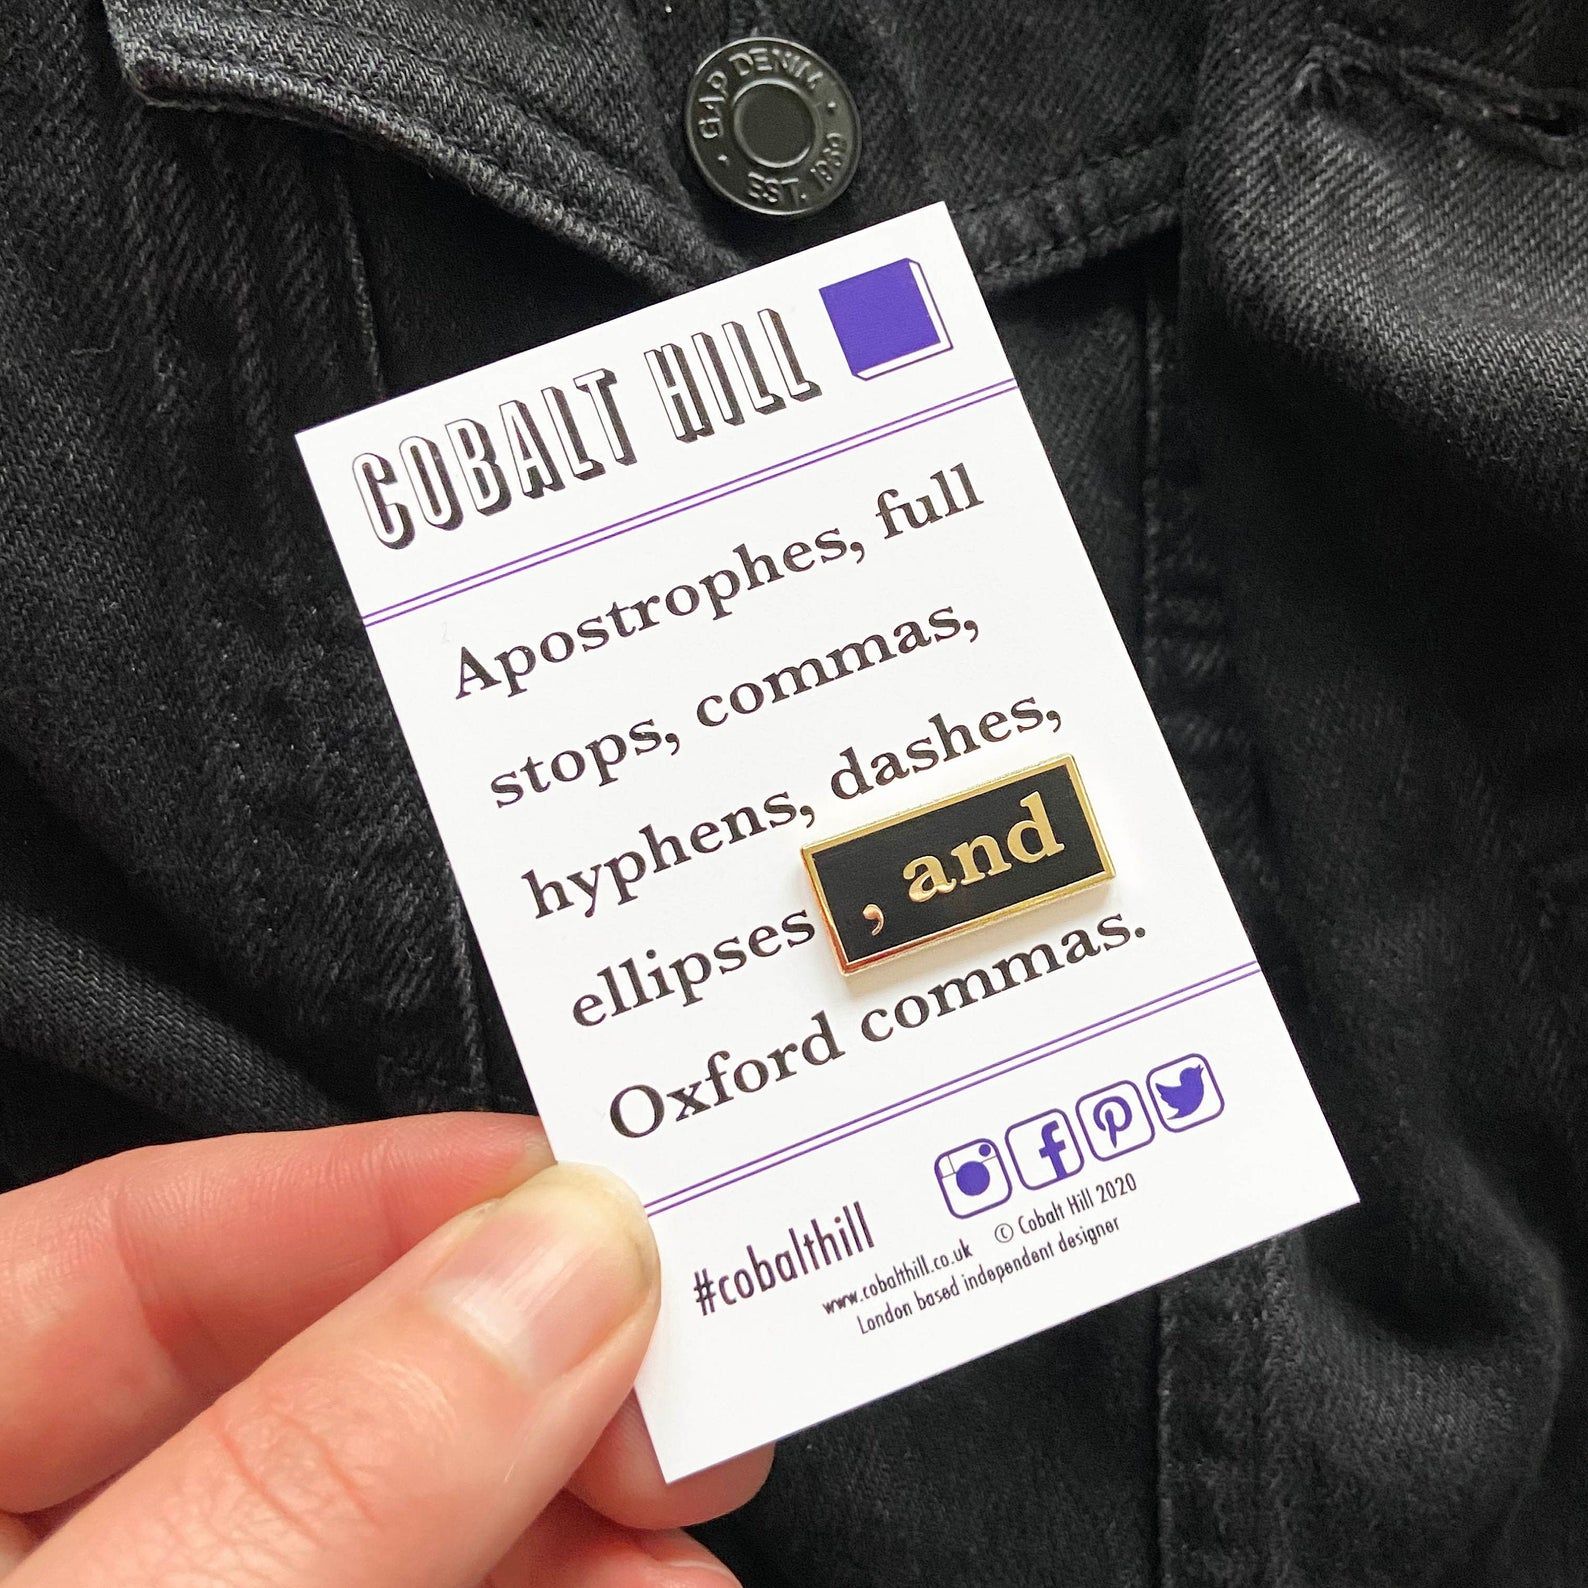 The pin reads " , and". It is on a cardboard backing that reads "Cobalt Hill: Apostrophes, full stops, commas, hyphens, dashes, ellipses, and Oxford commas." 